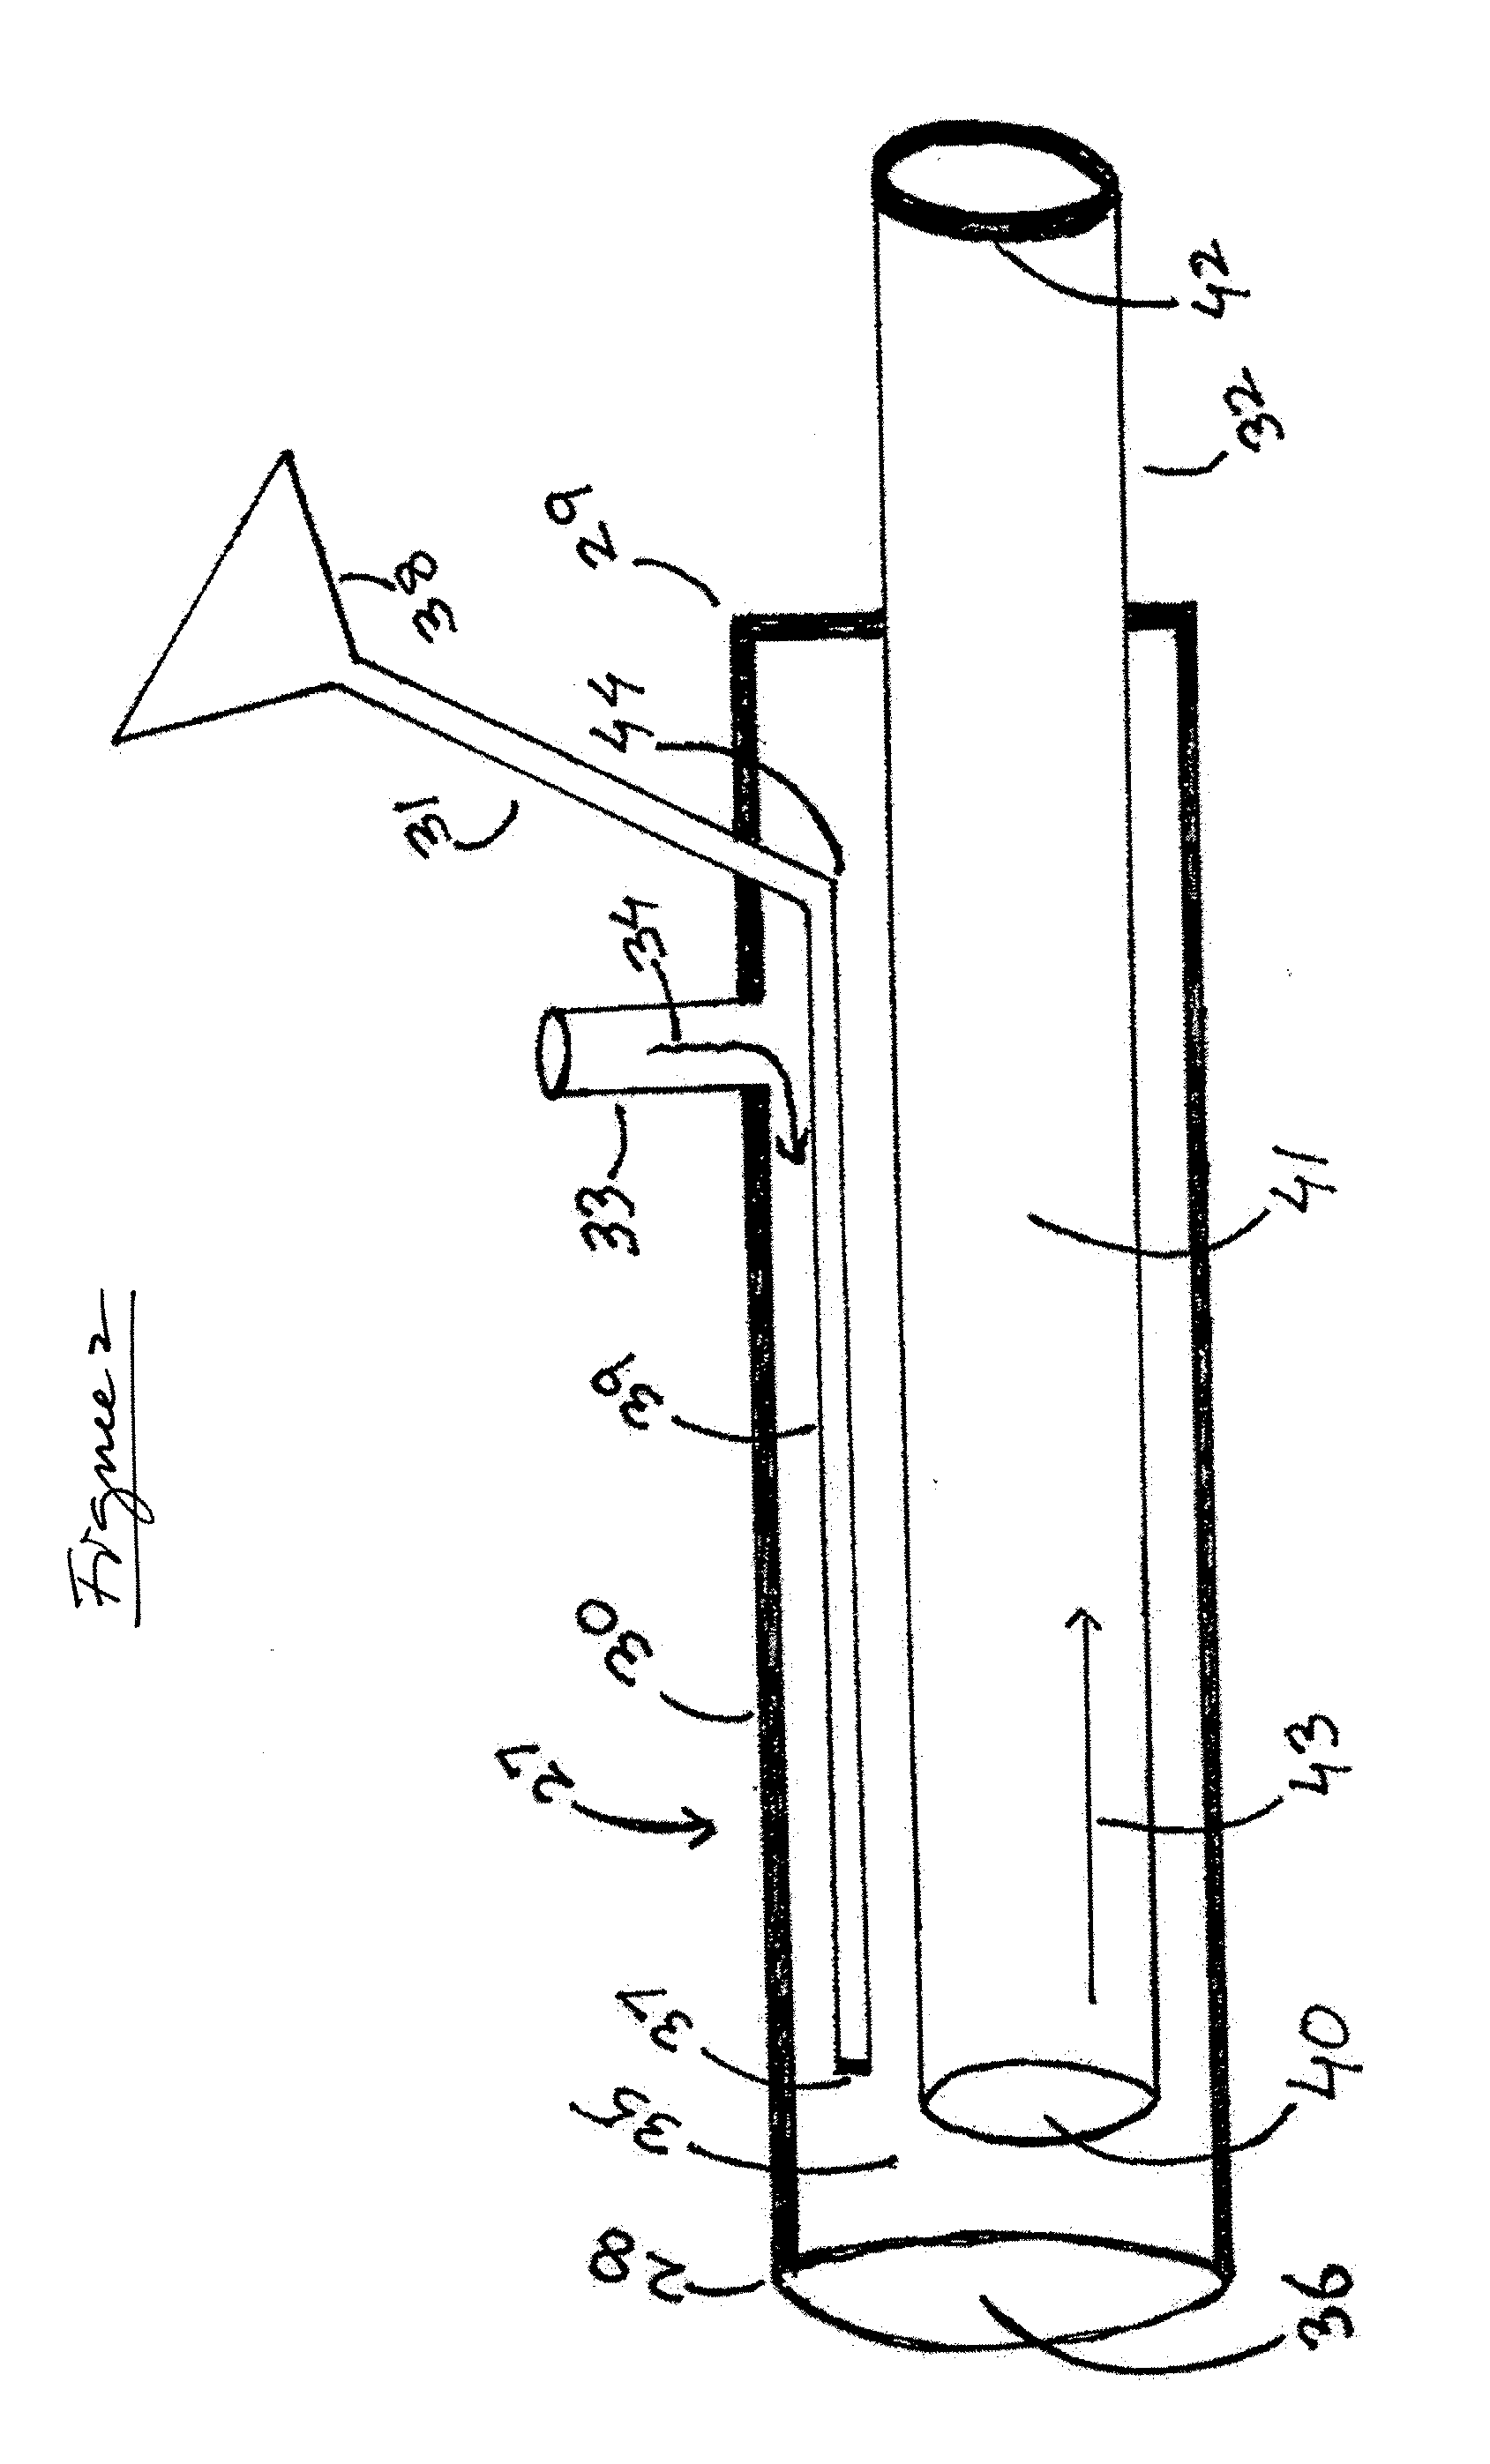 System for evacuating detached tissue in continuous flow irrigation endoscopic procedures